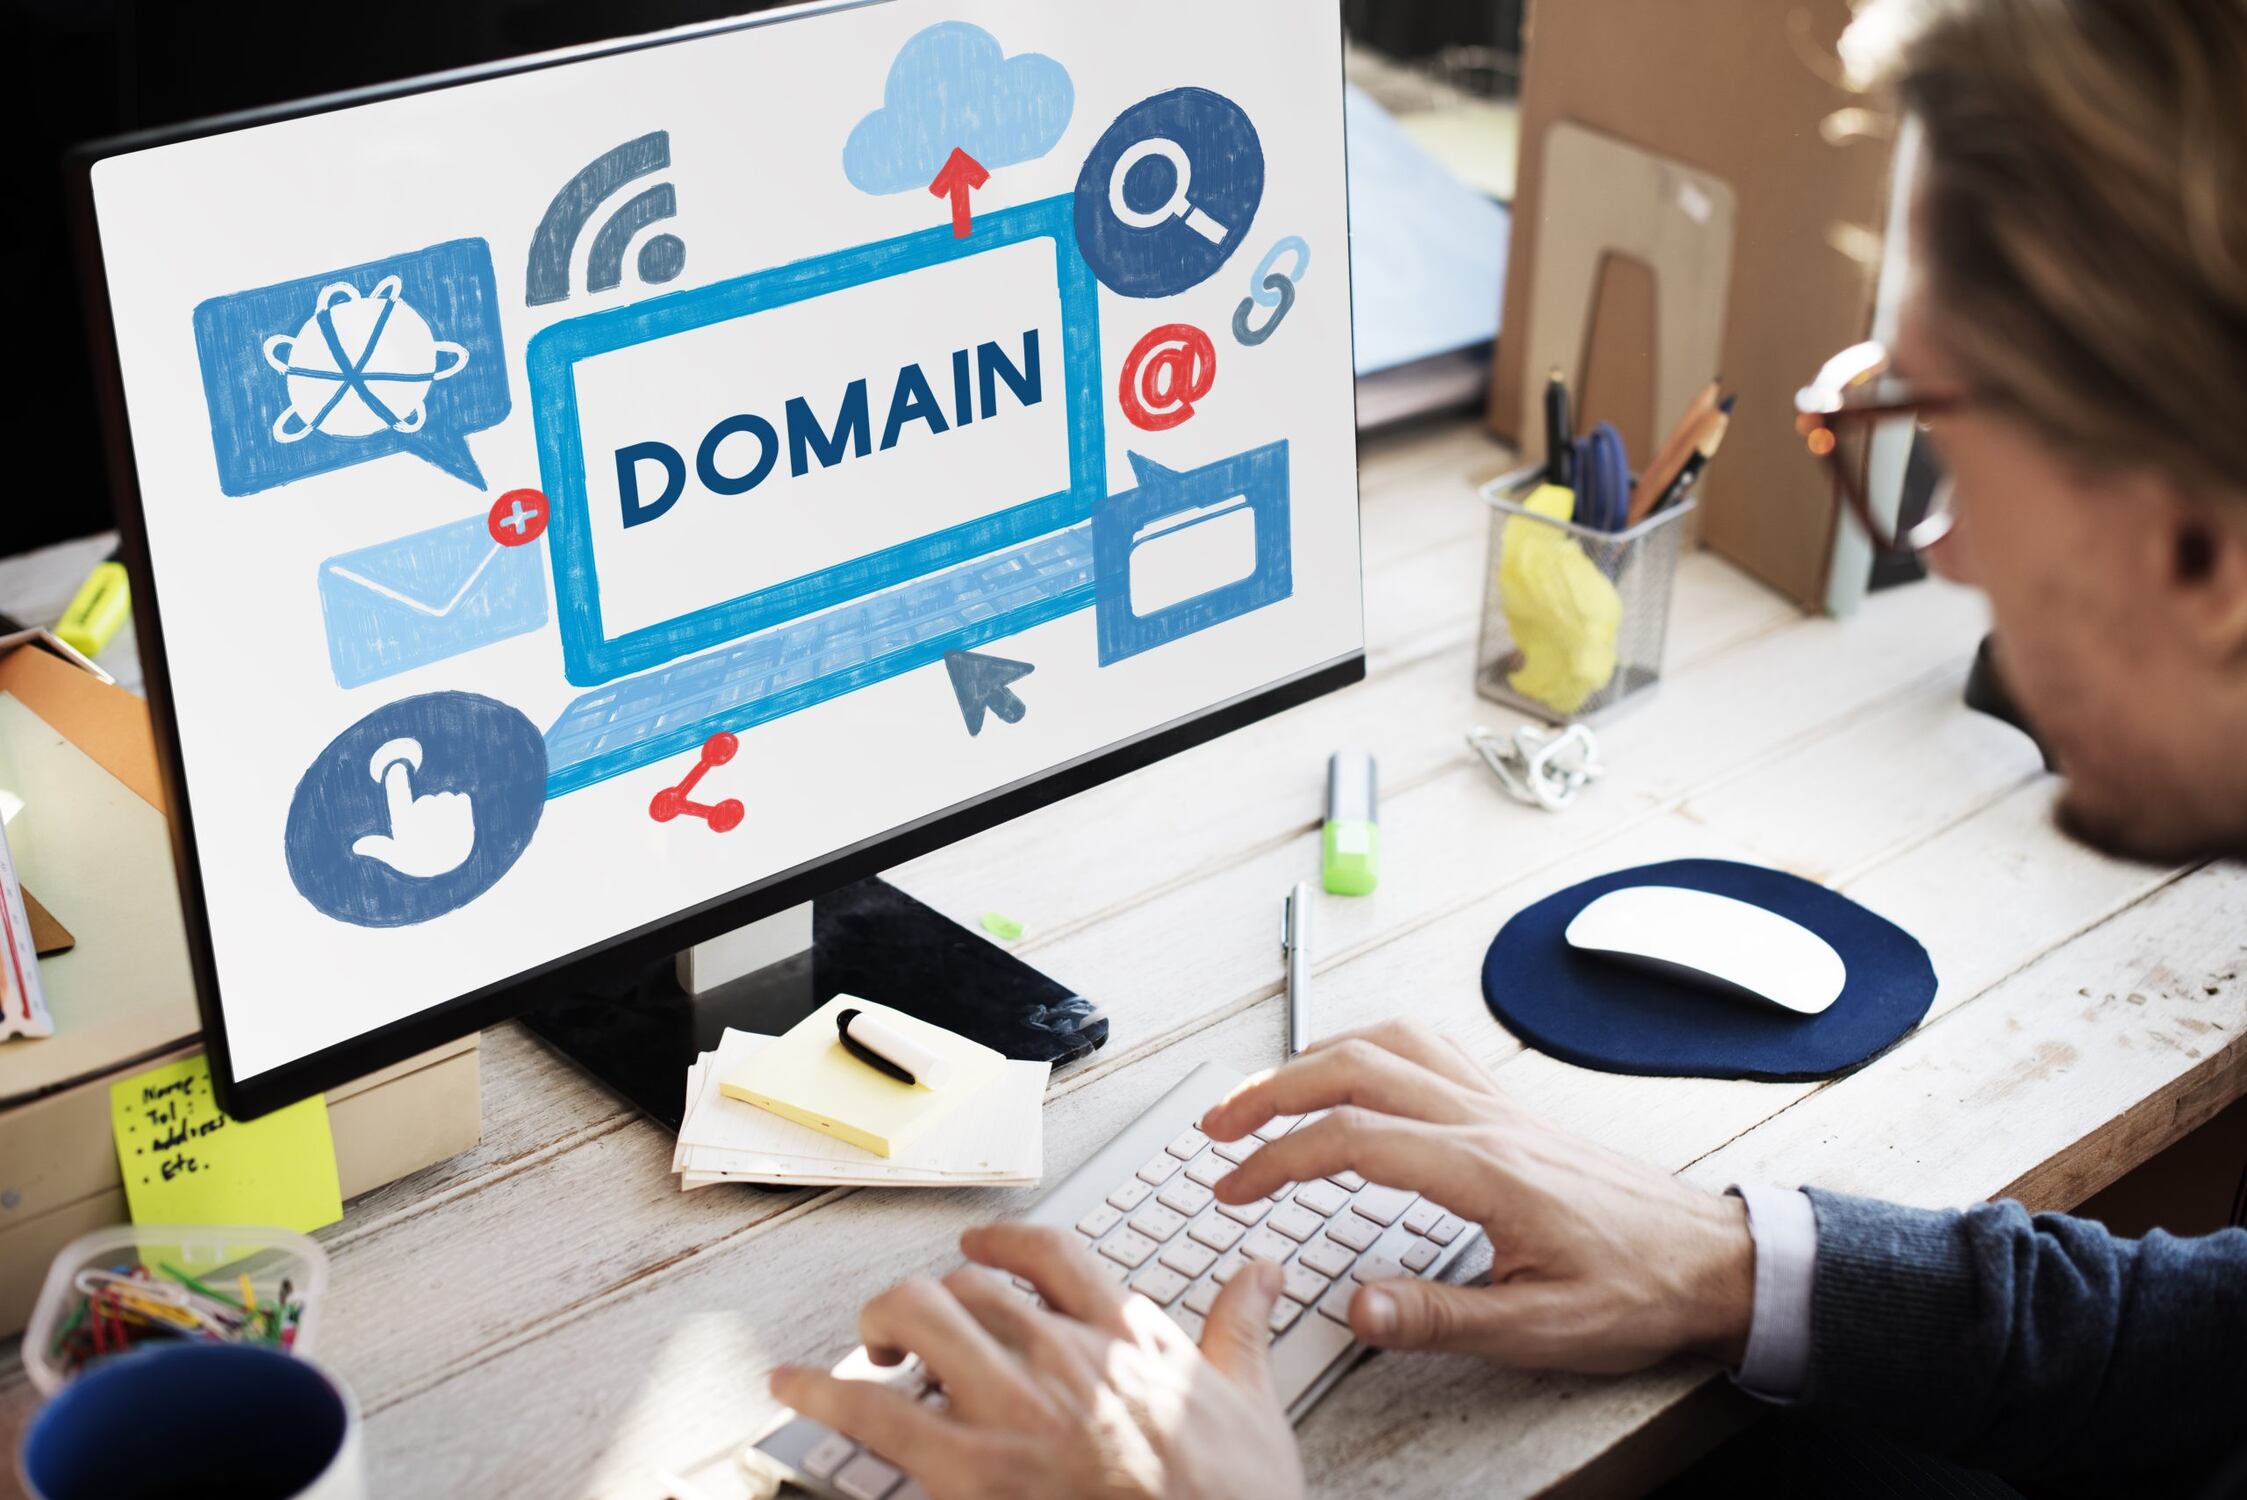 How To Add A Workstation To A Domain